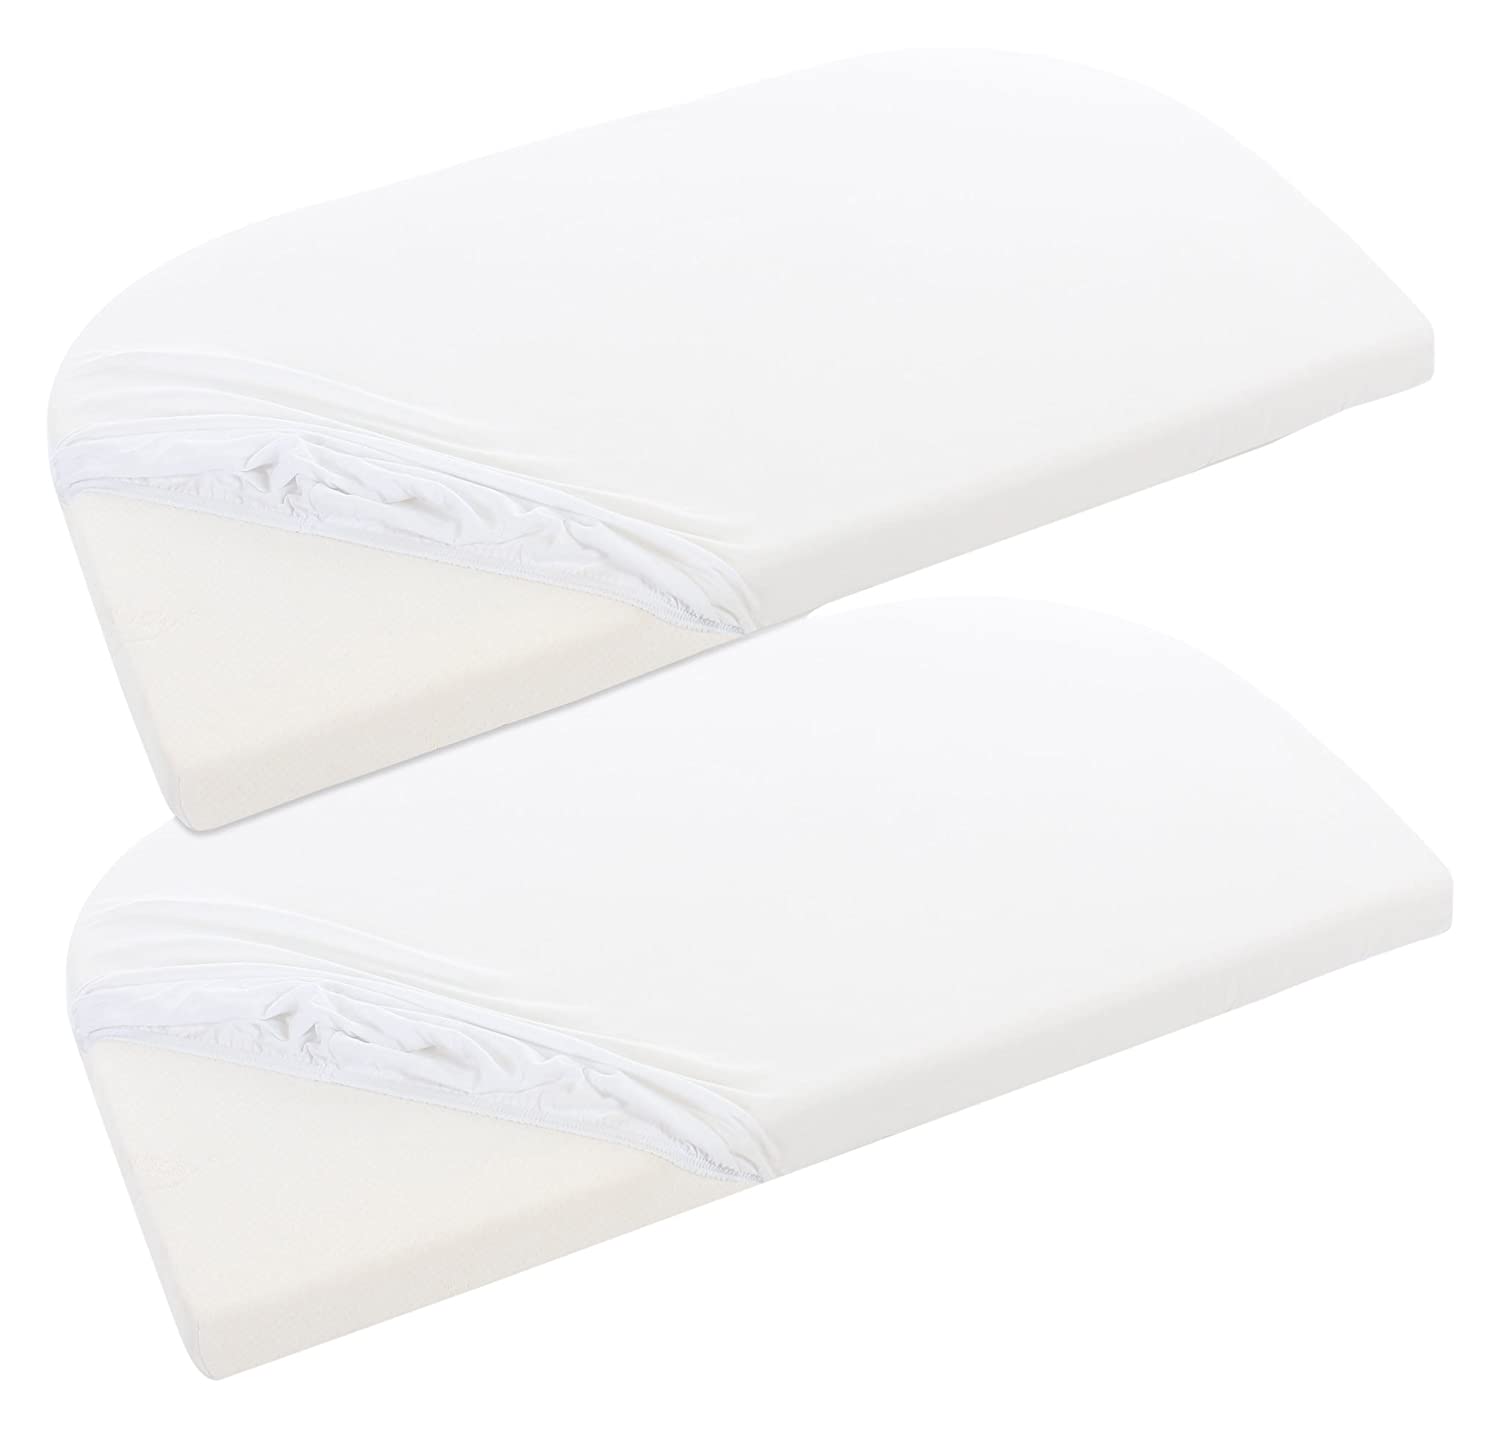 Babybay Jersey Fitted Sheet Deluxe Double Pack Fits Original Model, White, 